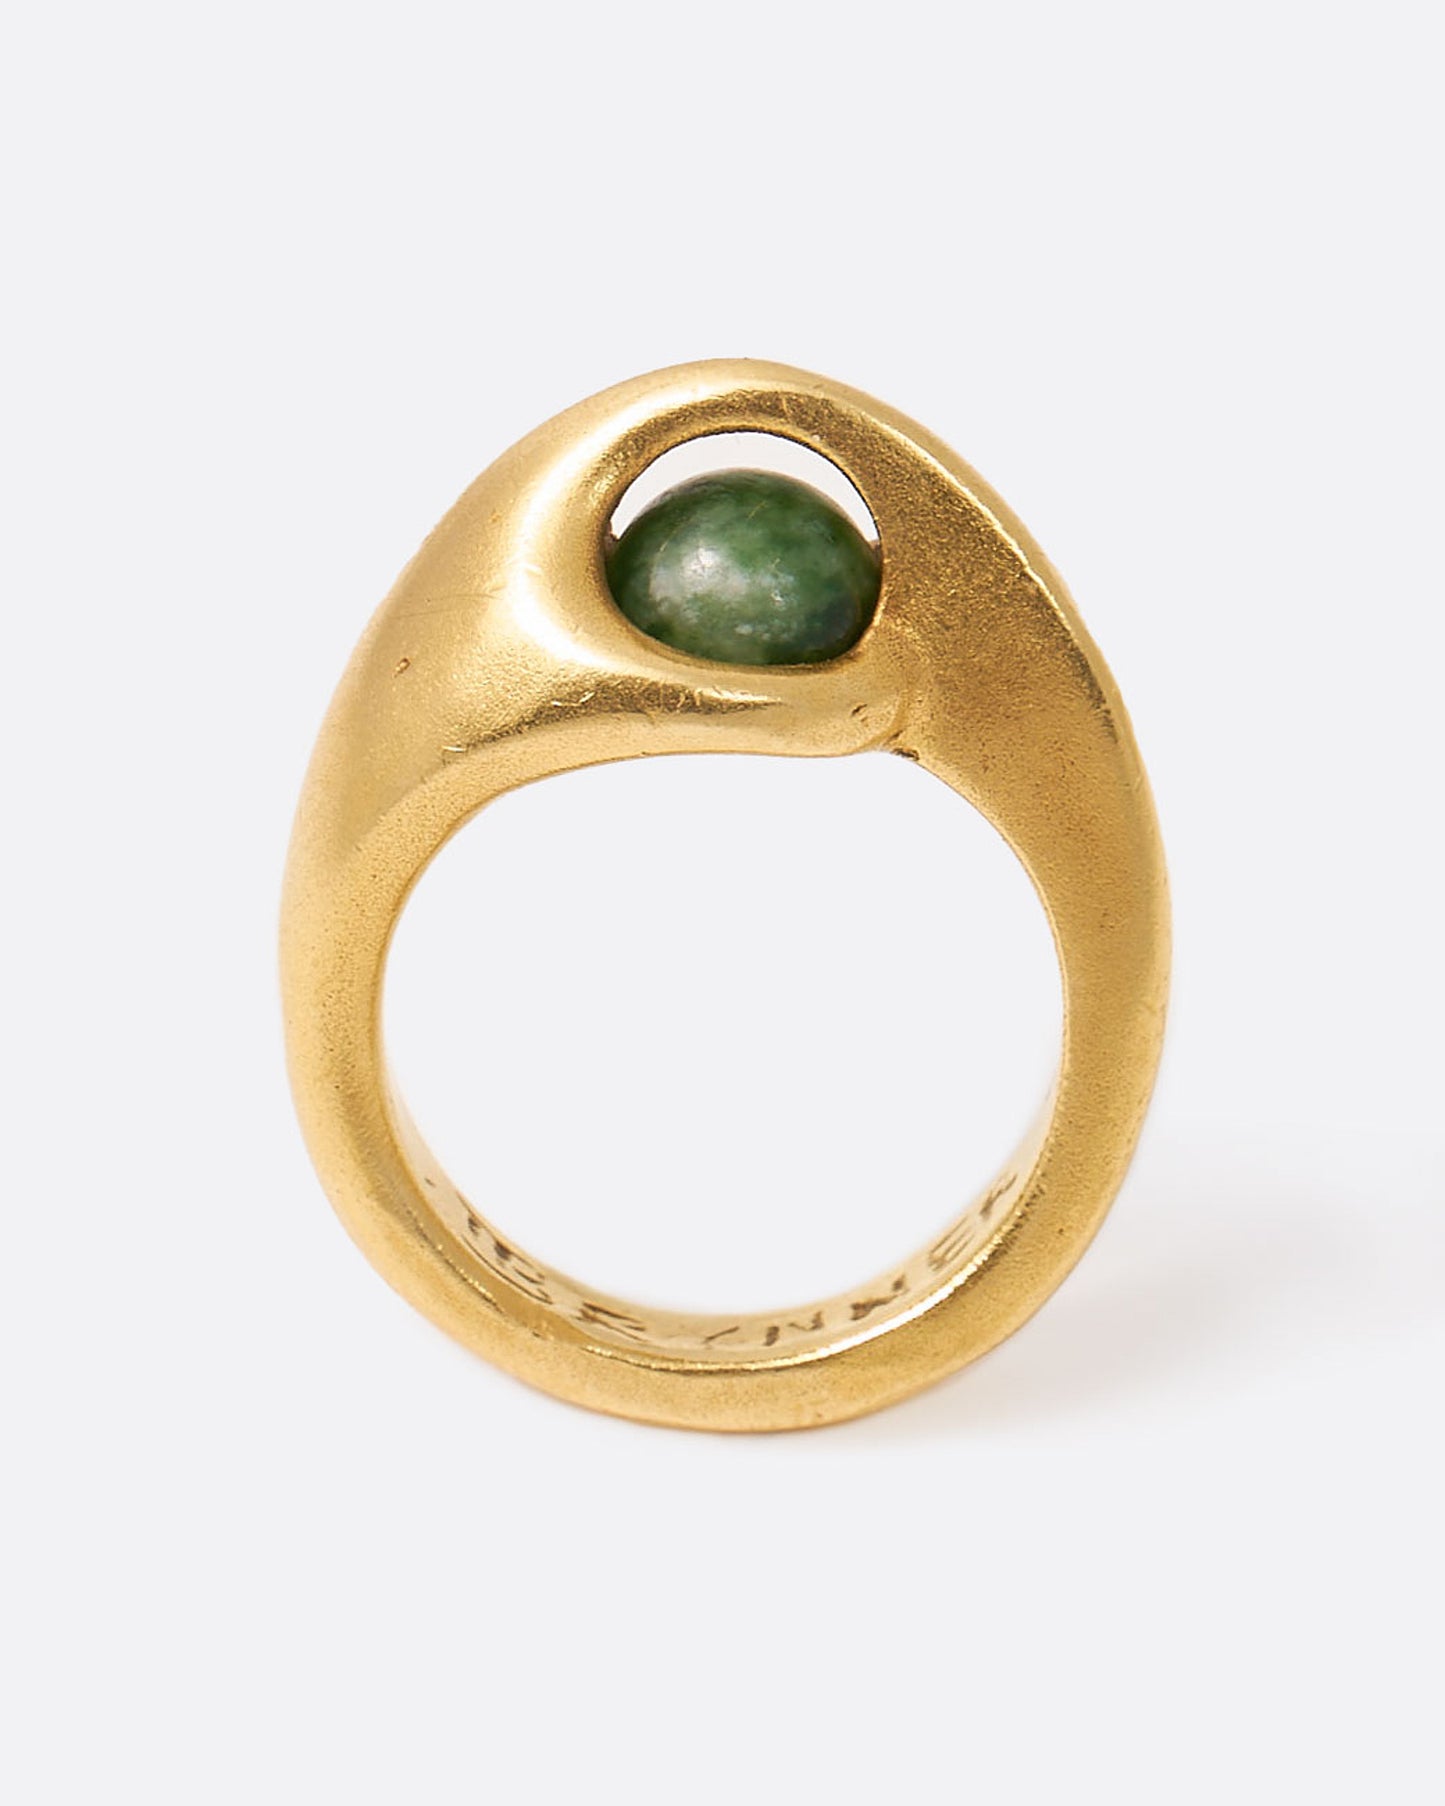 Yellow gold ring with floating green sodalite sphere, shown from the side.